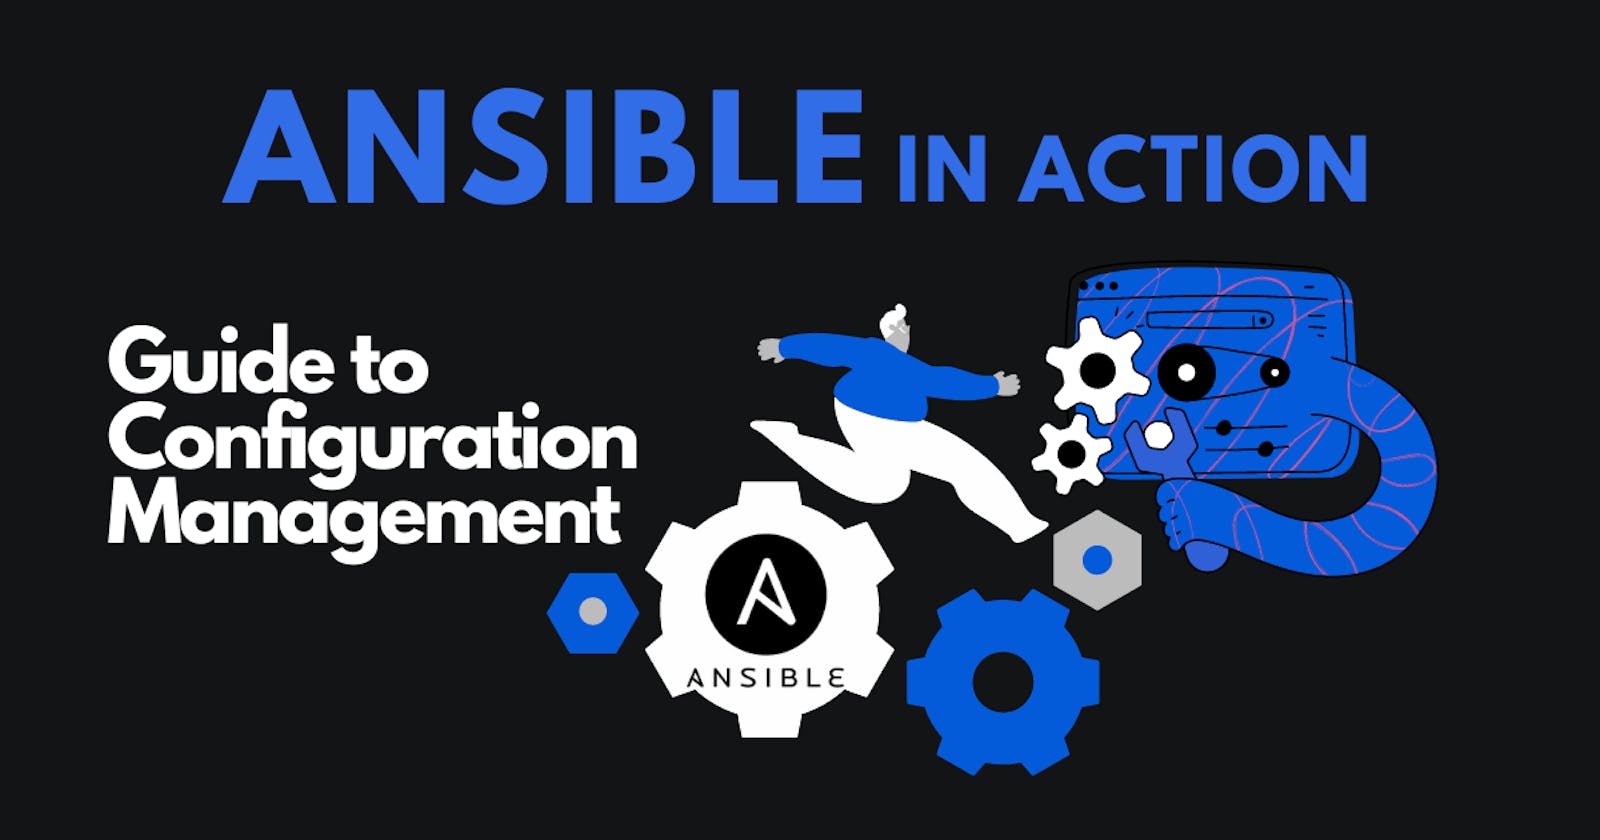 Ansible: A Practical Guide to Configuration Management